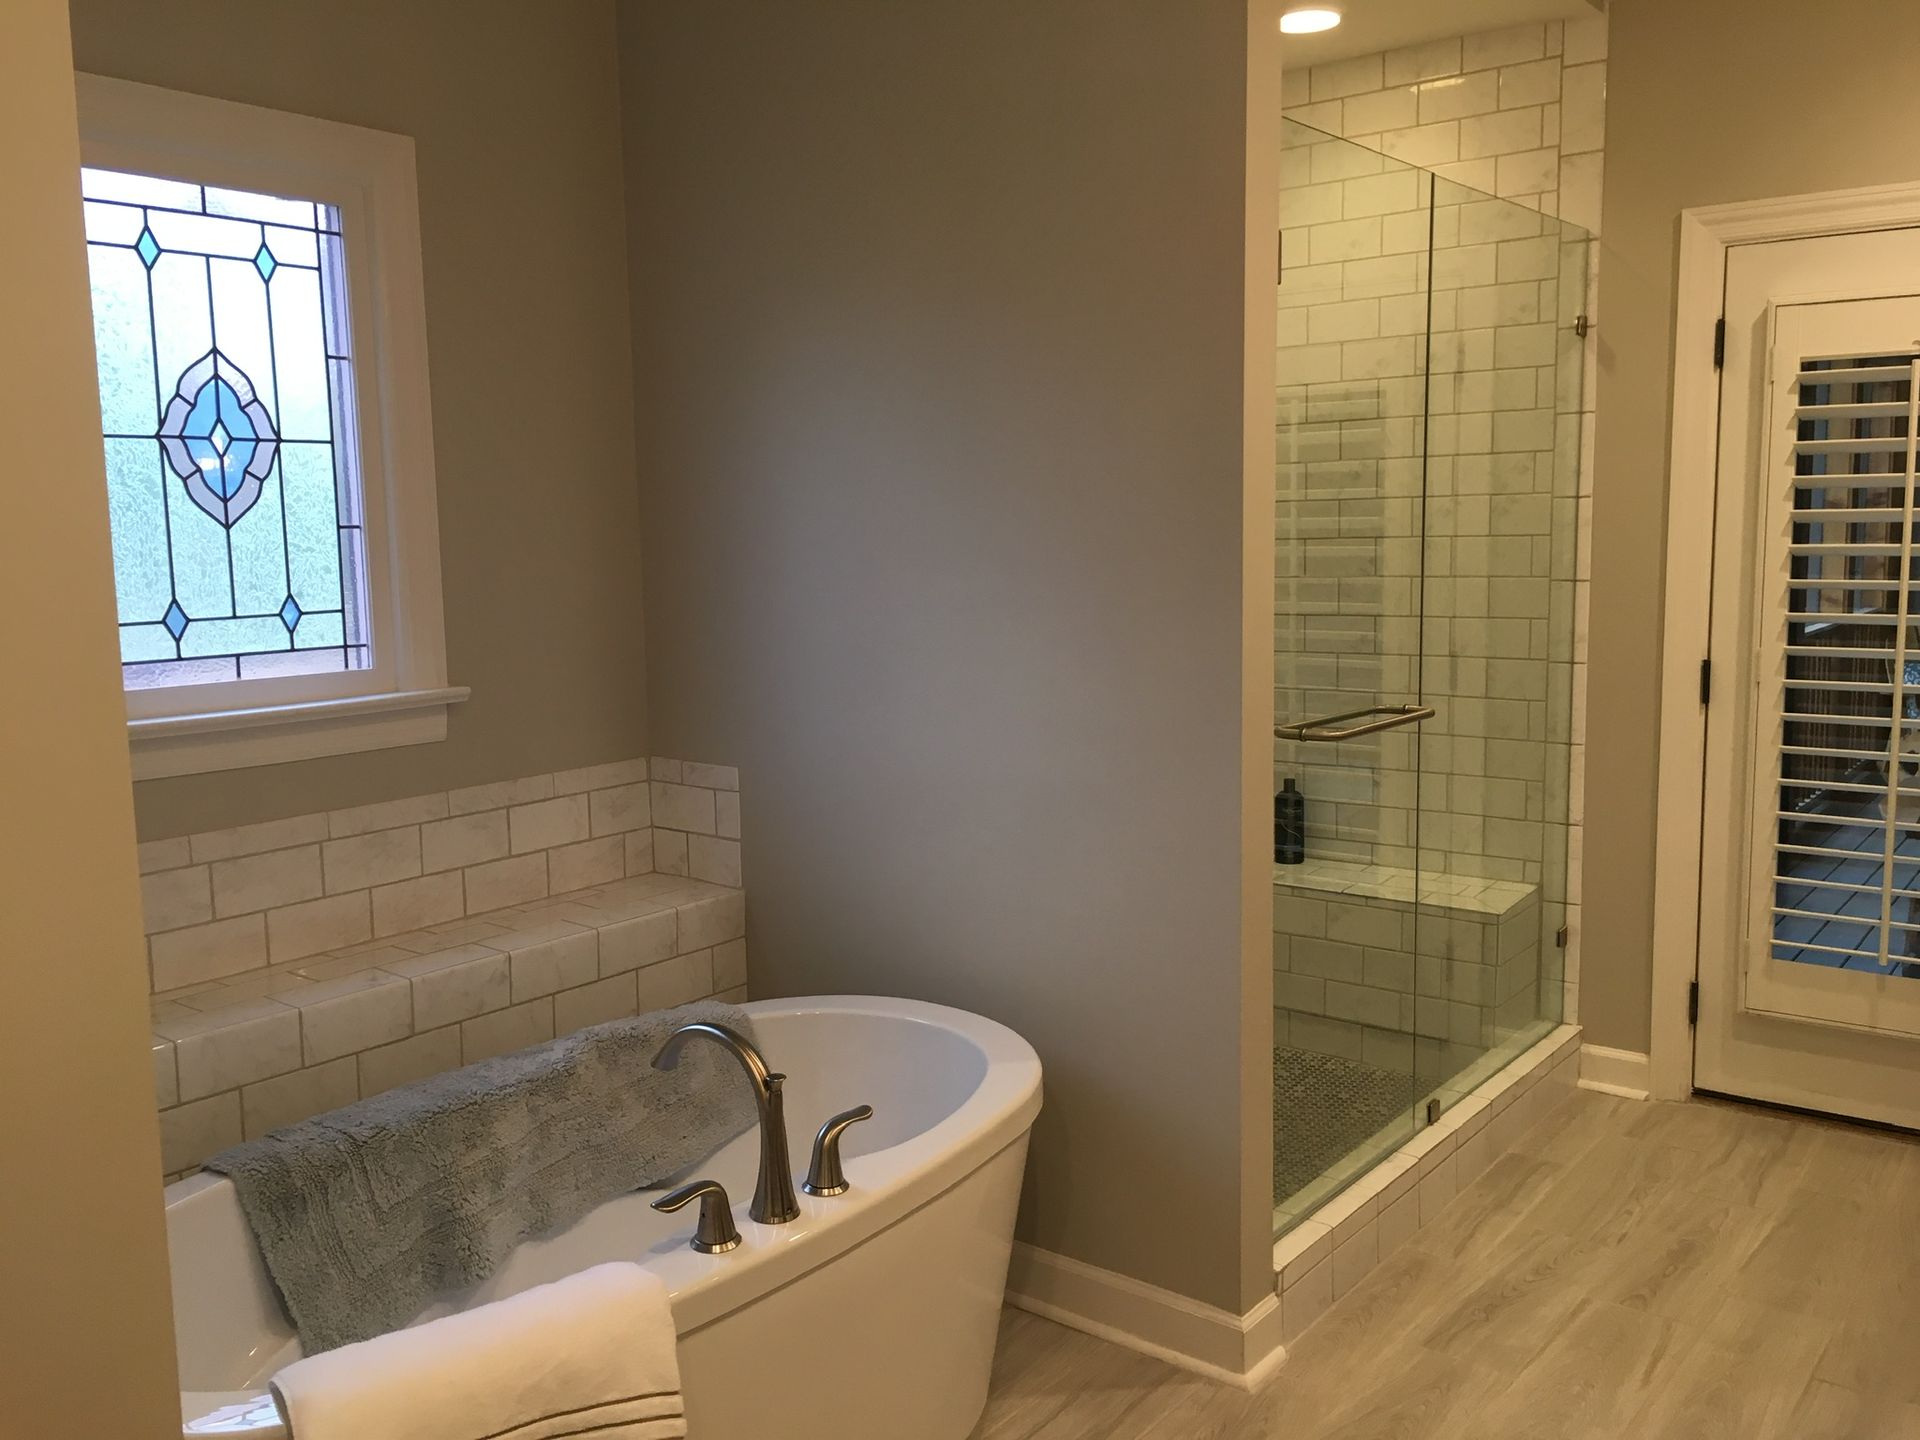 a bathroom with a tub , shower and stained glass window